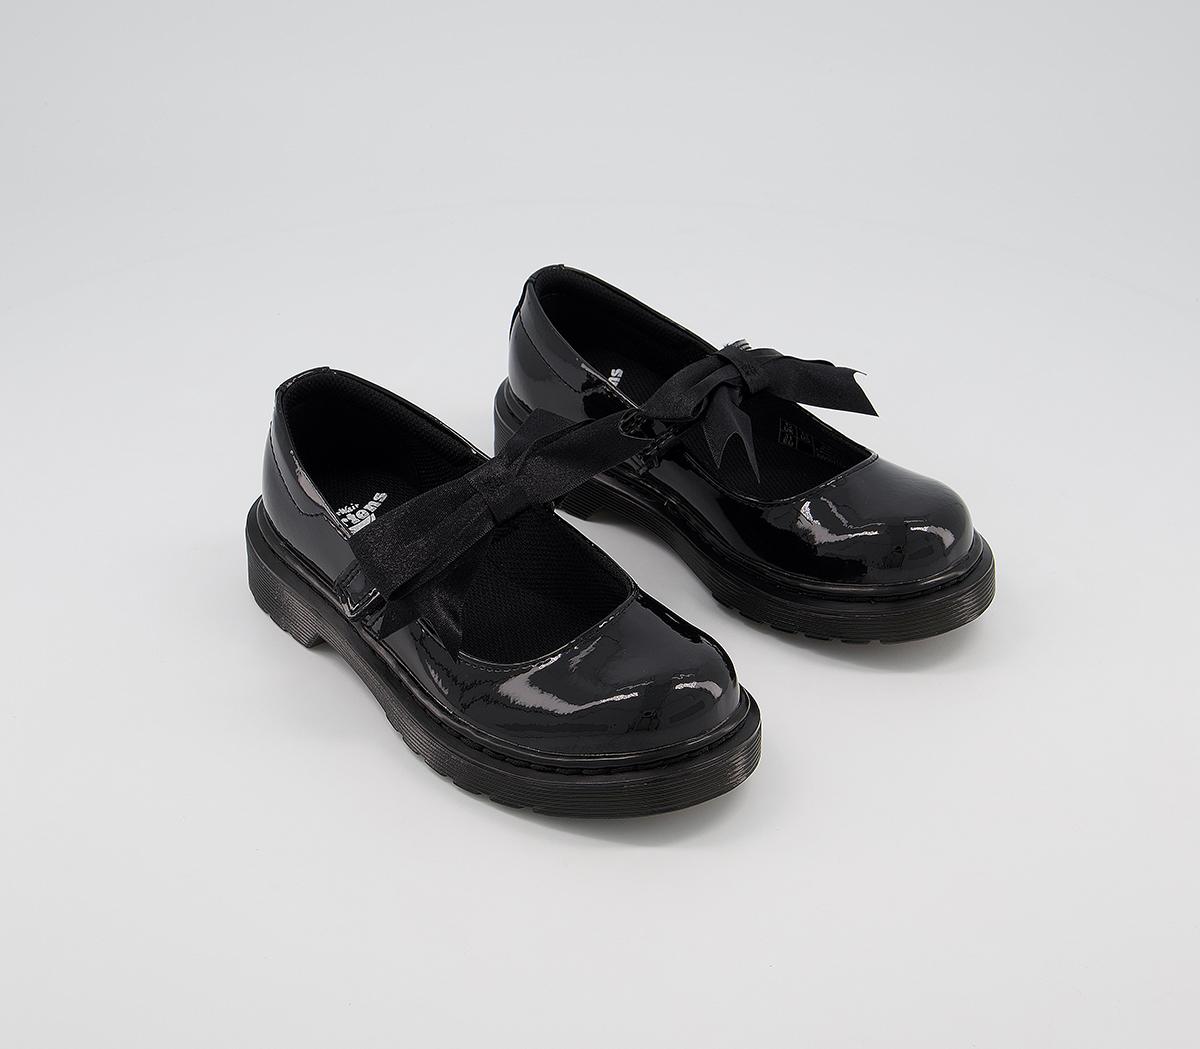 dr. martens kids maccy ii bow mary jane jnr black patent leather, 13 youth